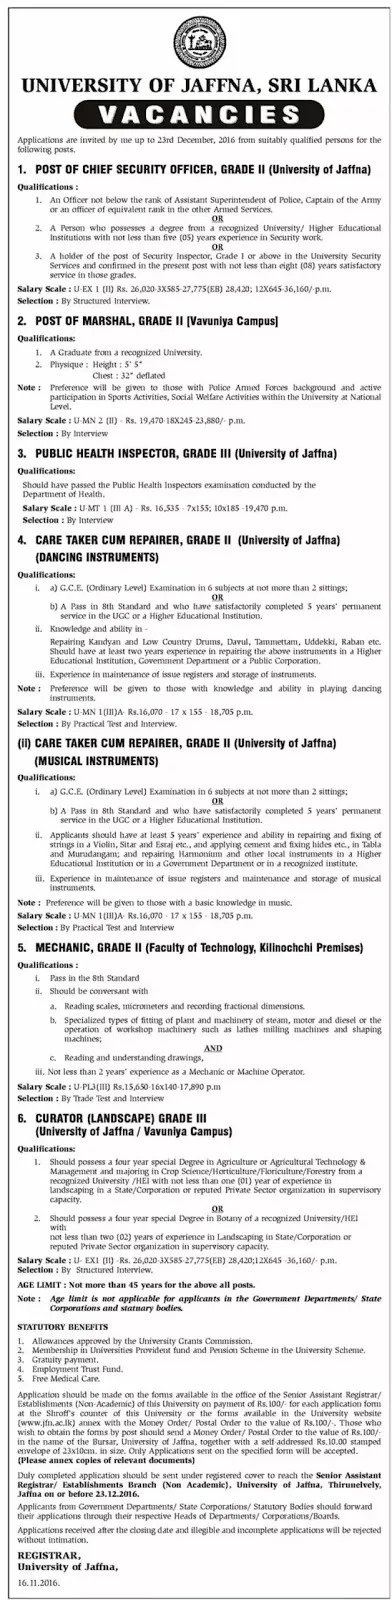 Chief Security Officer / Marshal / Public Health Inspector – University of Jaffna